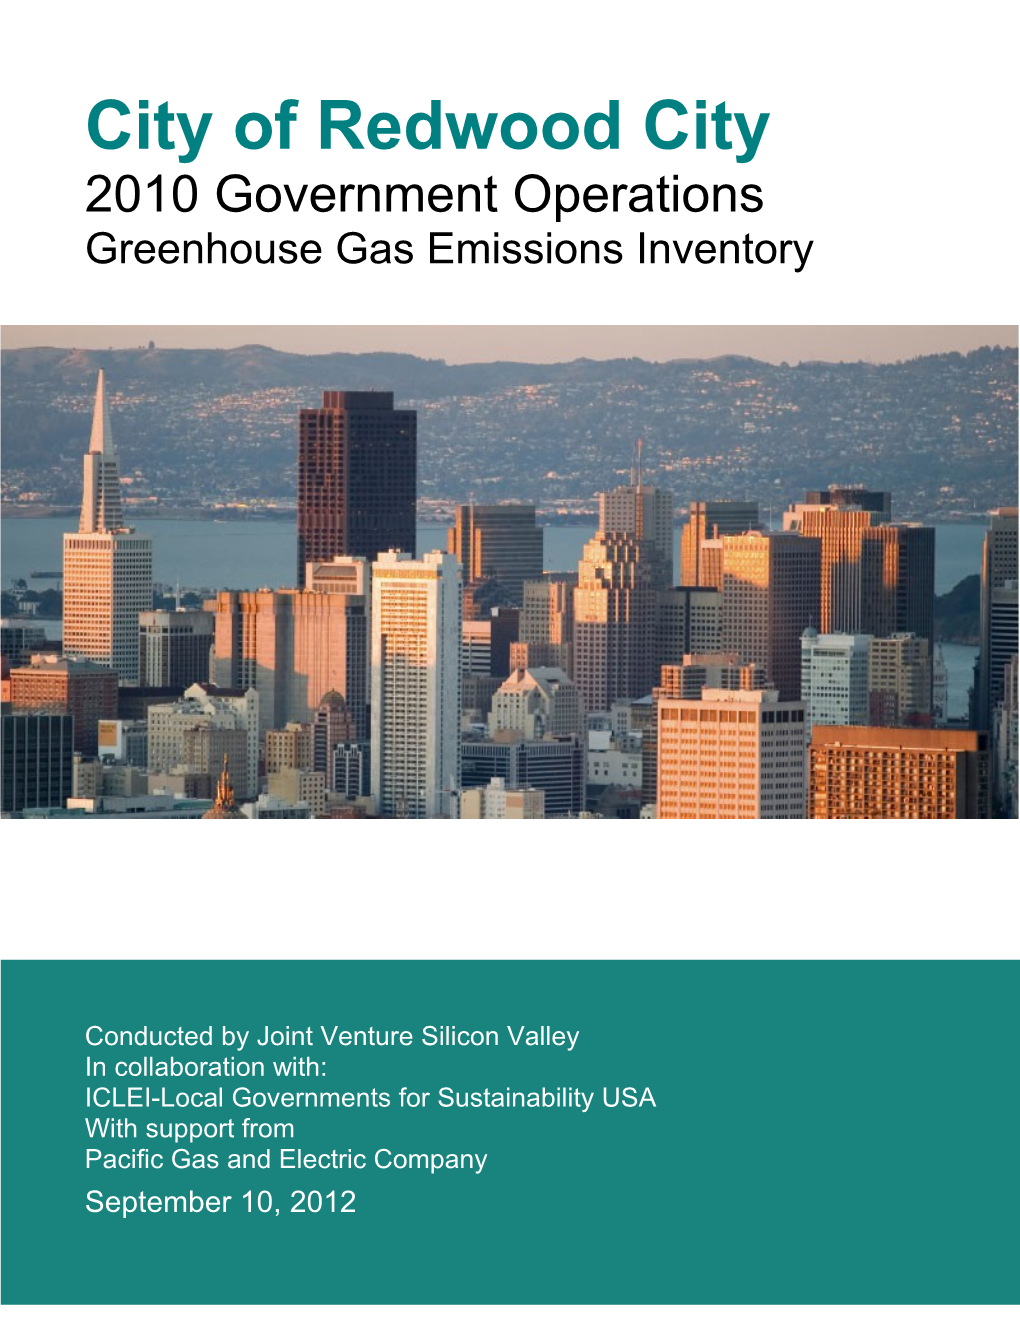 Government Operations Inventory Report Template